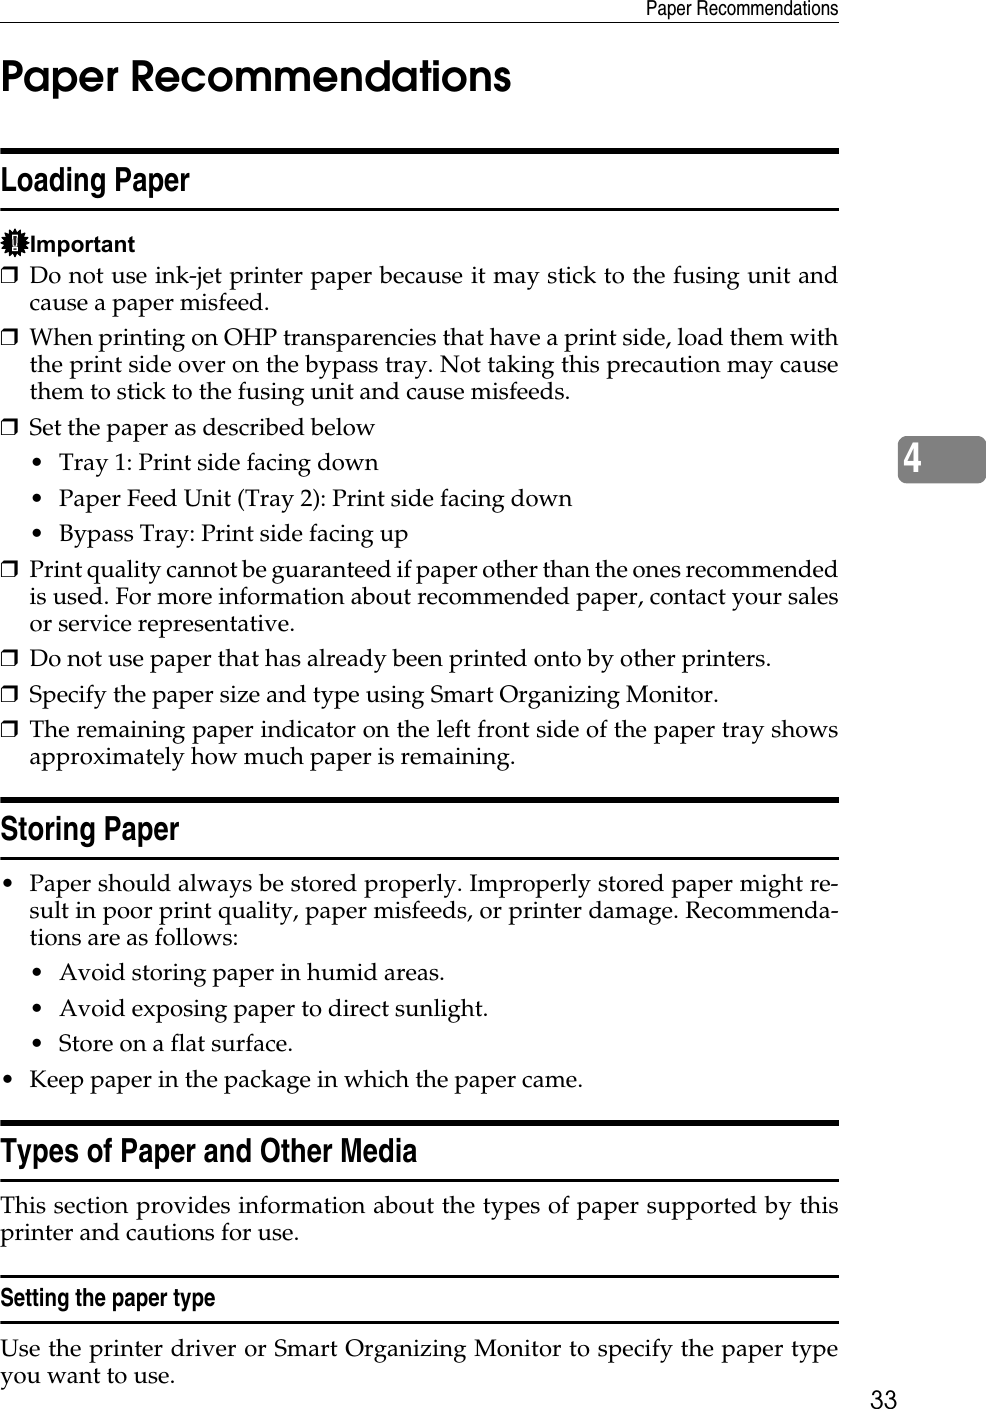 Paper Recommendations334Paper RecommendationsLoading PaperImportant❒Do not use ink-jet printer paper because it may stick to the fusing unit andcause a paper misfeed.❒When printing on OHP transparencies that have a print side, load them withthe print side over on the bypass tray. Not taking this precaution may causethem to stick to the fusing unit and cause misfeeds.❒Set the paper as described below• Tray 1: Print side facing down• Paper Feed Unit (Tray 2): Print side facing down• Bypass Tray: Print side facing up❒Print quality cannot be guaranteed if paper other than the ones recommendedis used. For more information about recommended paper, contact your salesor service representative.❒Do not use paper that has already been printed onto by other printers.❒Specify the paper size and type using Smart Organizing Monitor.❒The remaining paper indicator on the left front side of the paper tray showsapproximately how much paper is remaining.Storing Paper• Paper should always be stored properly. Improperly stored paper might re-sult in poor print quality, paper misfeeds, or printer damage. Recommenda-tions are as follows:• Avoid storing paper in humid areas.• Avoid exposing paper to direct sunlight.• Store on a flat surface.• Keep paper in the package in which the paper came.Types of Paper and Other MediaThis section provides information about the types of paper supported by thisprinter and cautions for use.Setting the paper typeUse the printer driver or Smart Organizing Monitor to specify the paper typeyou want to use.